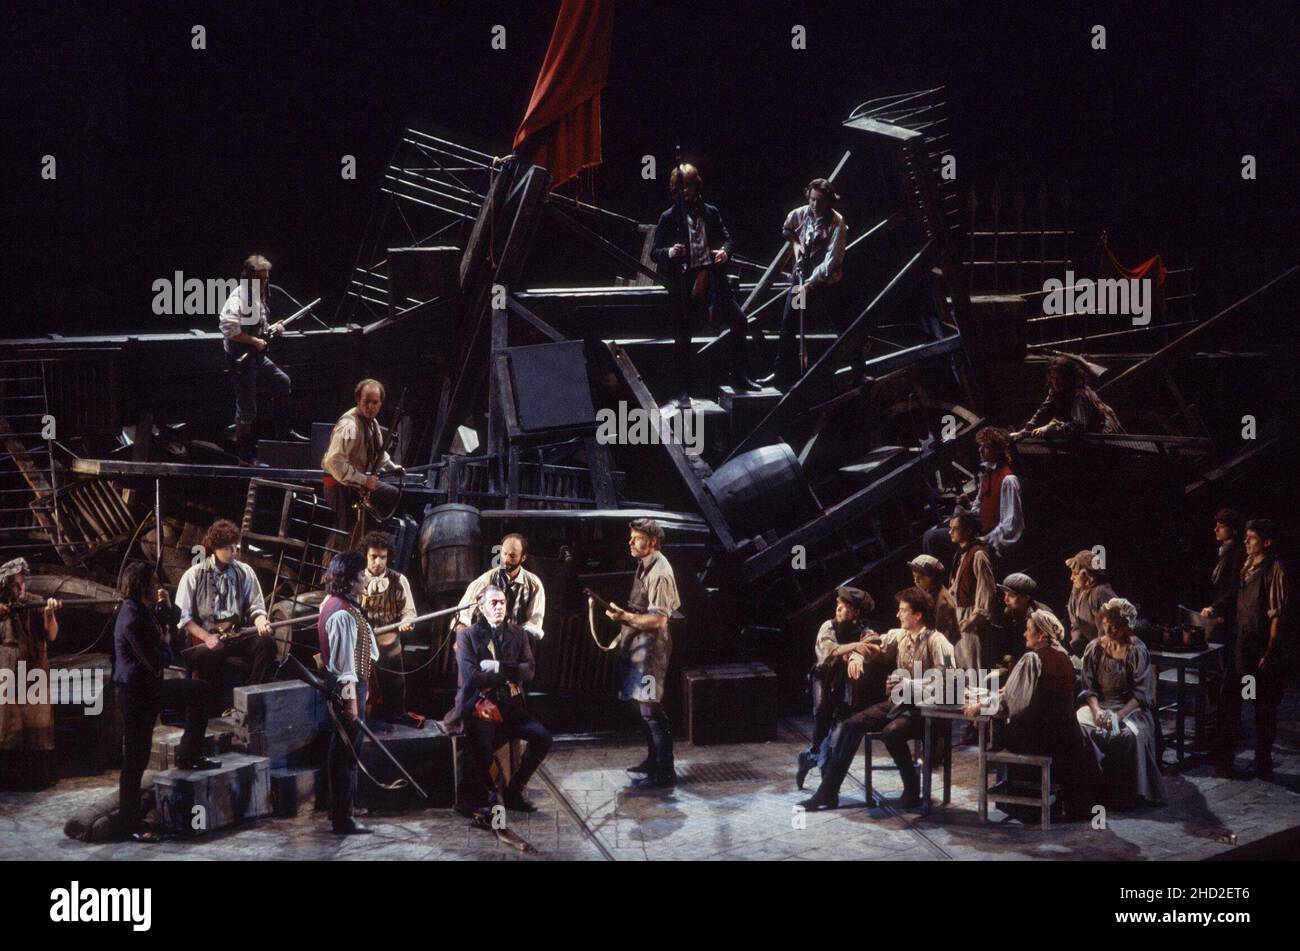 original London cast - revolutionaries at the barricades with (seated centre) Roger Allam (Javert) in LES MISERABLES at the Barbican Theatre, London EC2 08/10/1985   music: Claude-Michel Schonberg  text: Herbert Kretzmer  original text by Alain Boubil & Jean-Marc Natel   additional material: James Fenton  based on the novel by Victor Hugo  adapted & directed by Trevor Nunn & John Caird  set design: John Napier  costumes: Andreane Neofitou  lighting: David Hersey  a Royal Shakespeare Company (RSC) & Cameron Mackintosh co-production   transferred to the Palace Theatre, London W1 04/12/1985-2004 Stock Photo